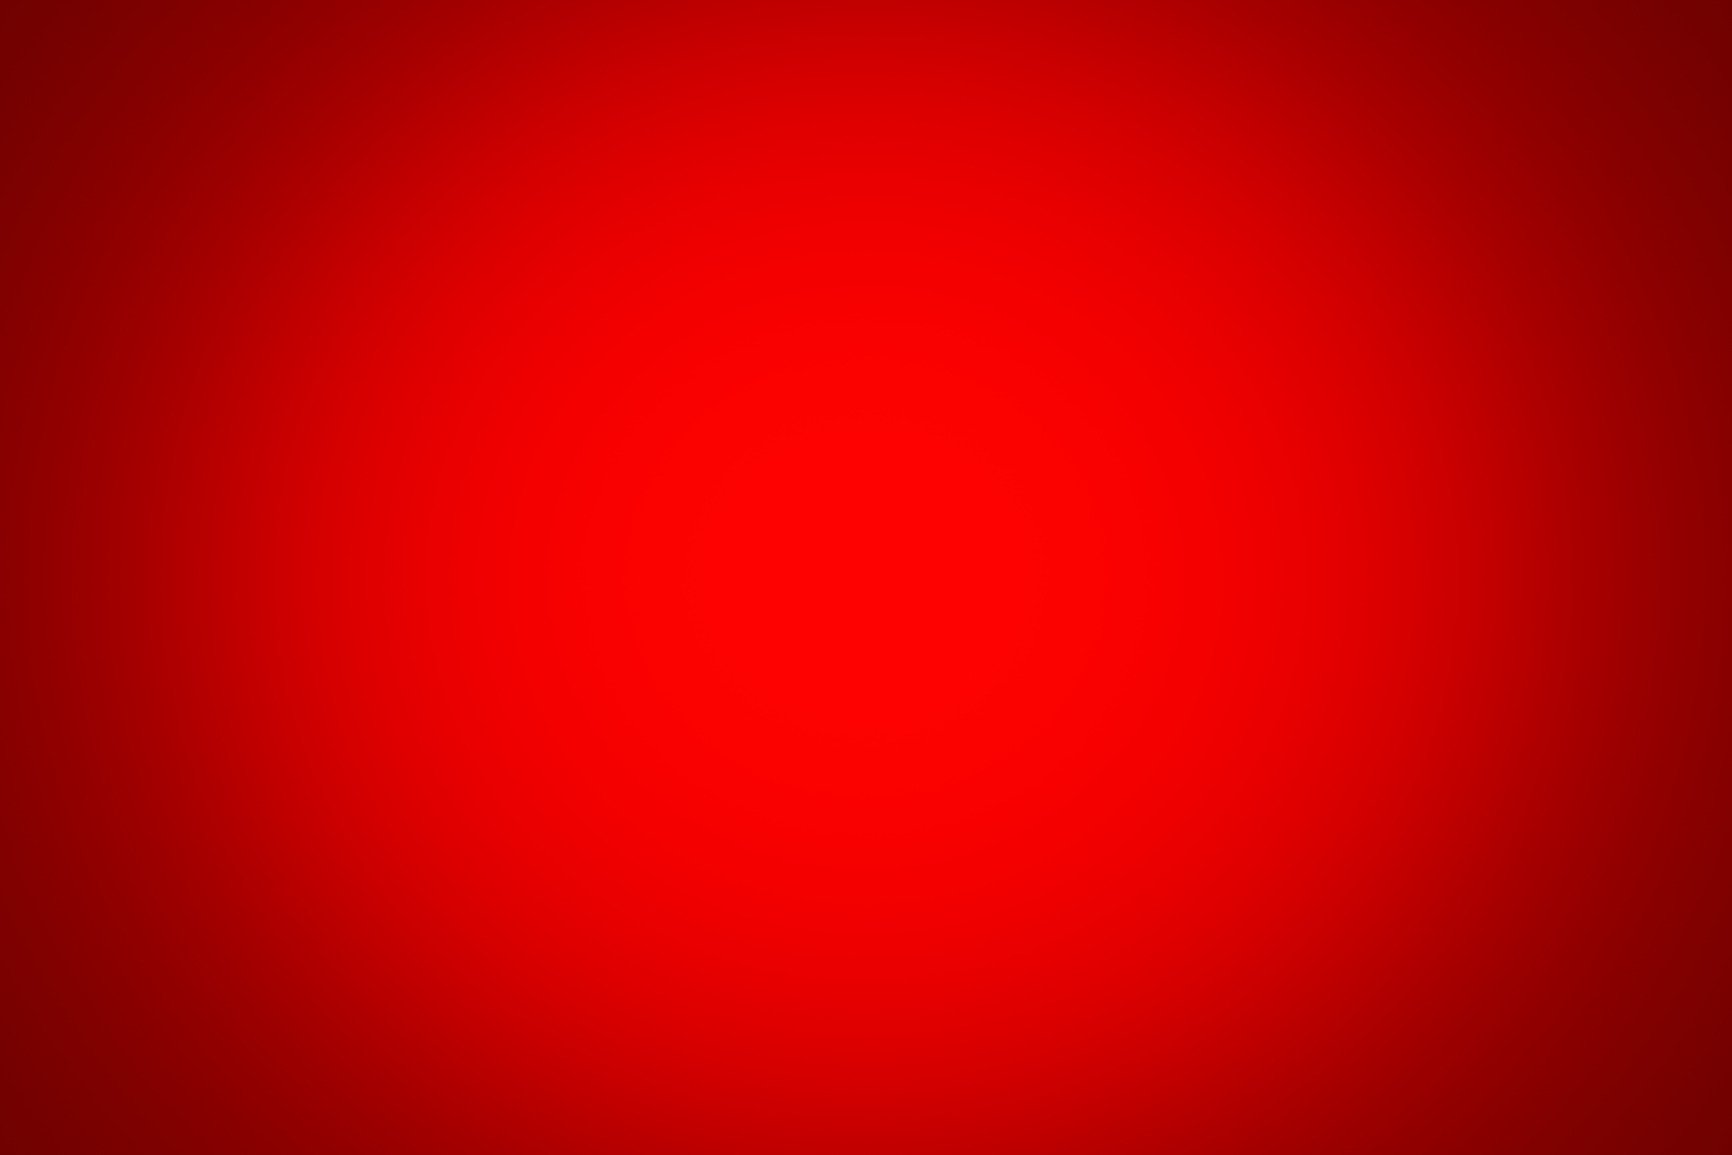 Free download Plain Bright Red Background Image amp Picture Becuo [1732x1155] for your Desktop, Mobile & Tablet. Explore Picture Of Red Background. Red Wallpaper Image